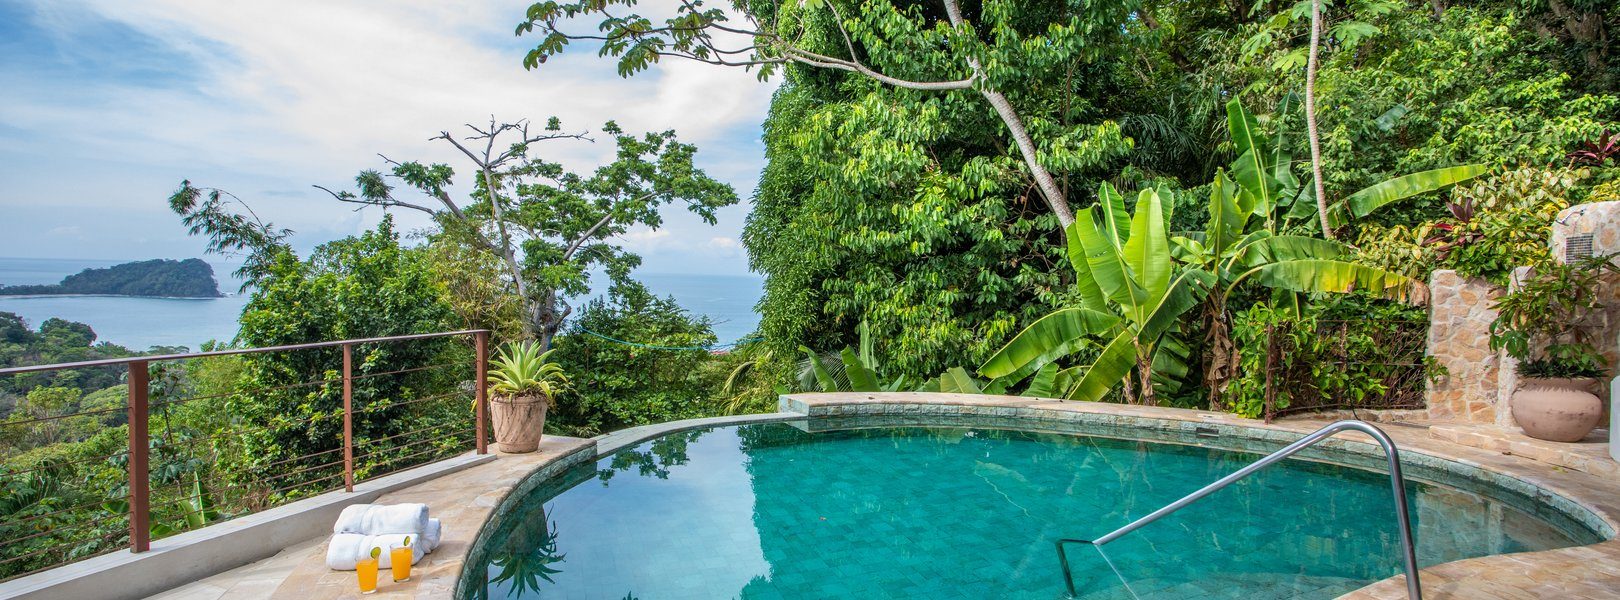 The private ocean-view pool at this magnificent villa is perfect for a refreshing dip on a hot Manuel Antonio afternoon.